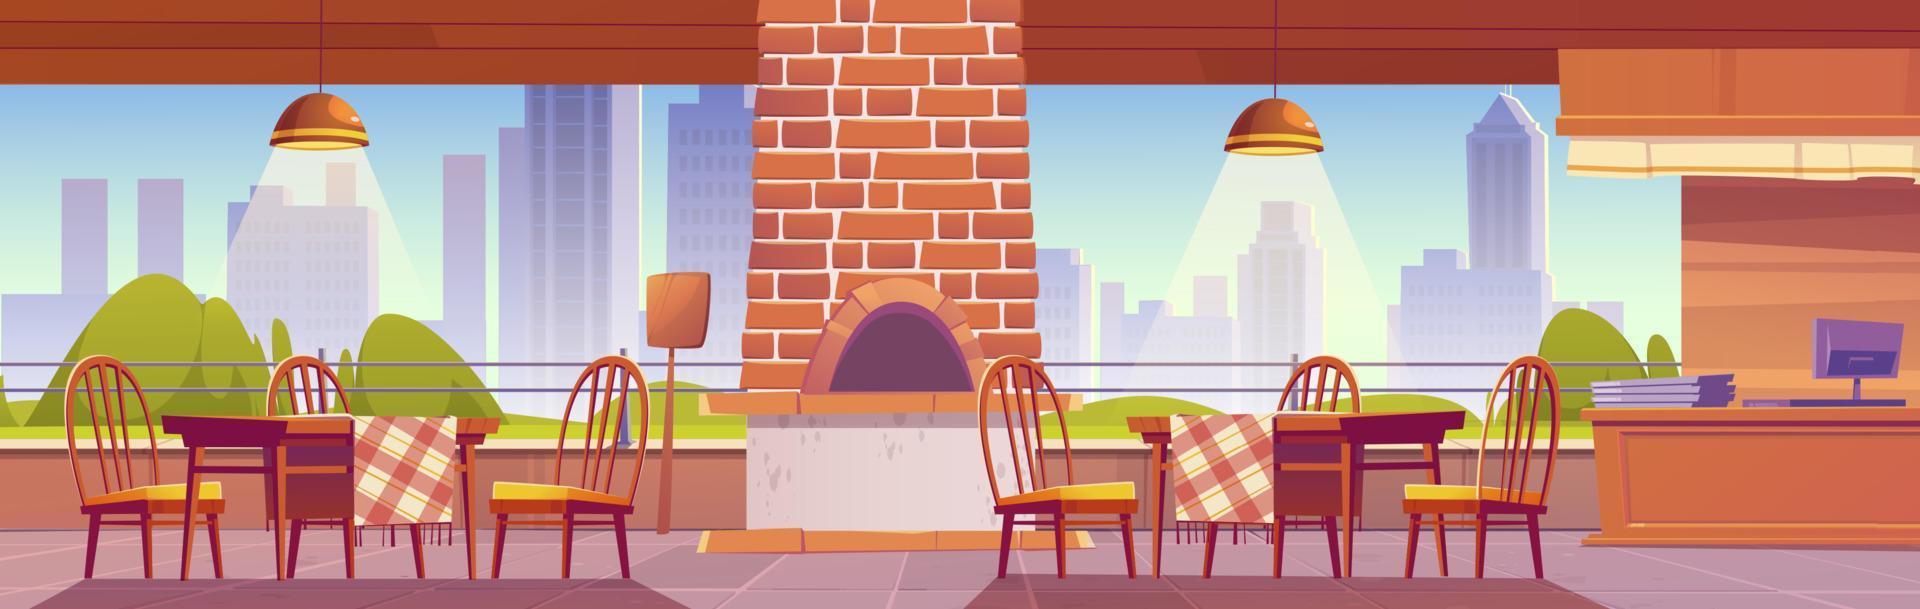 Pizzeria or family outdoor cozy cafe with oven vector